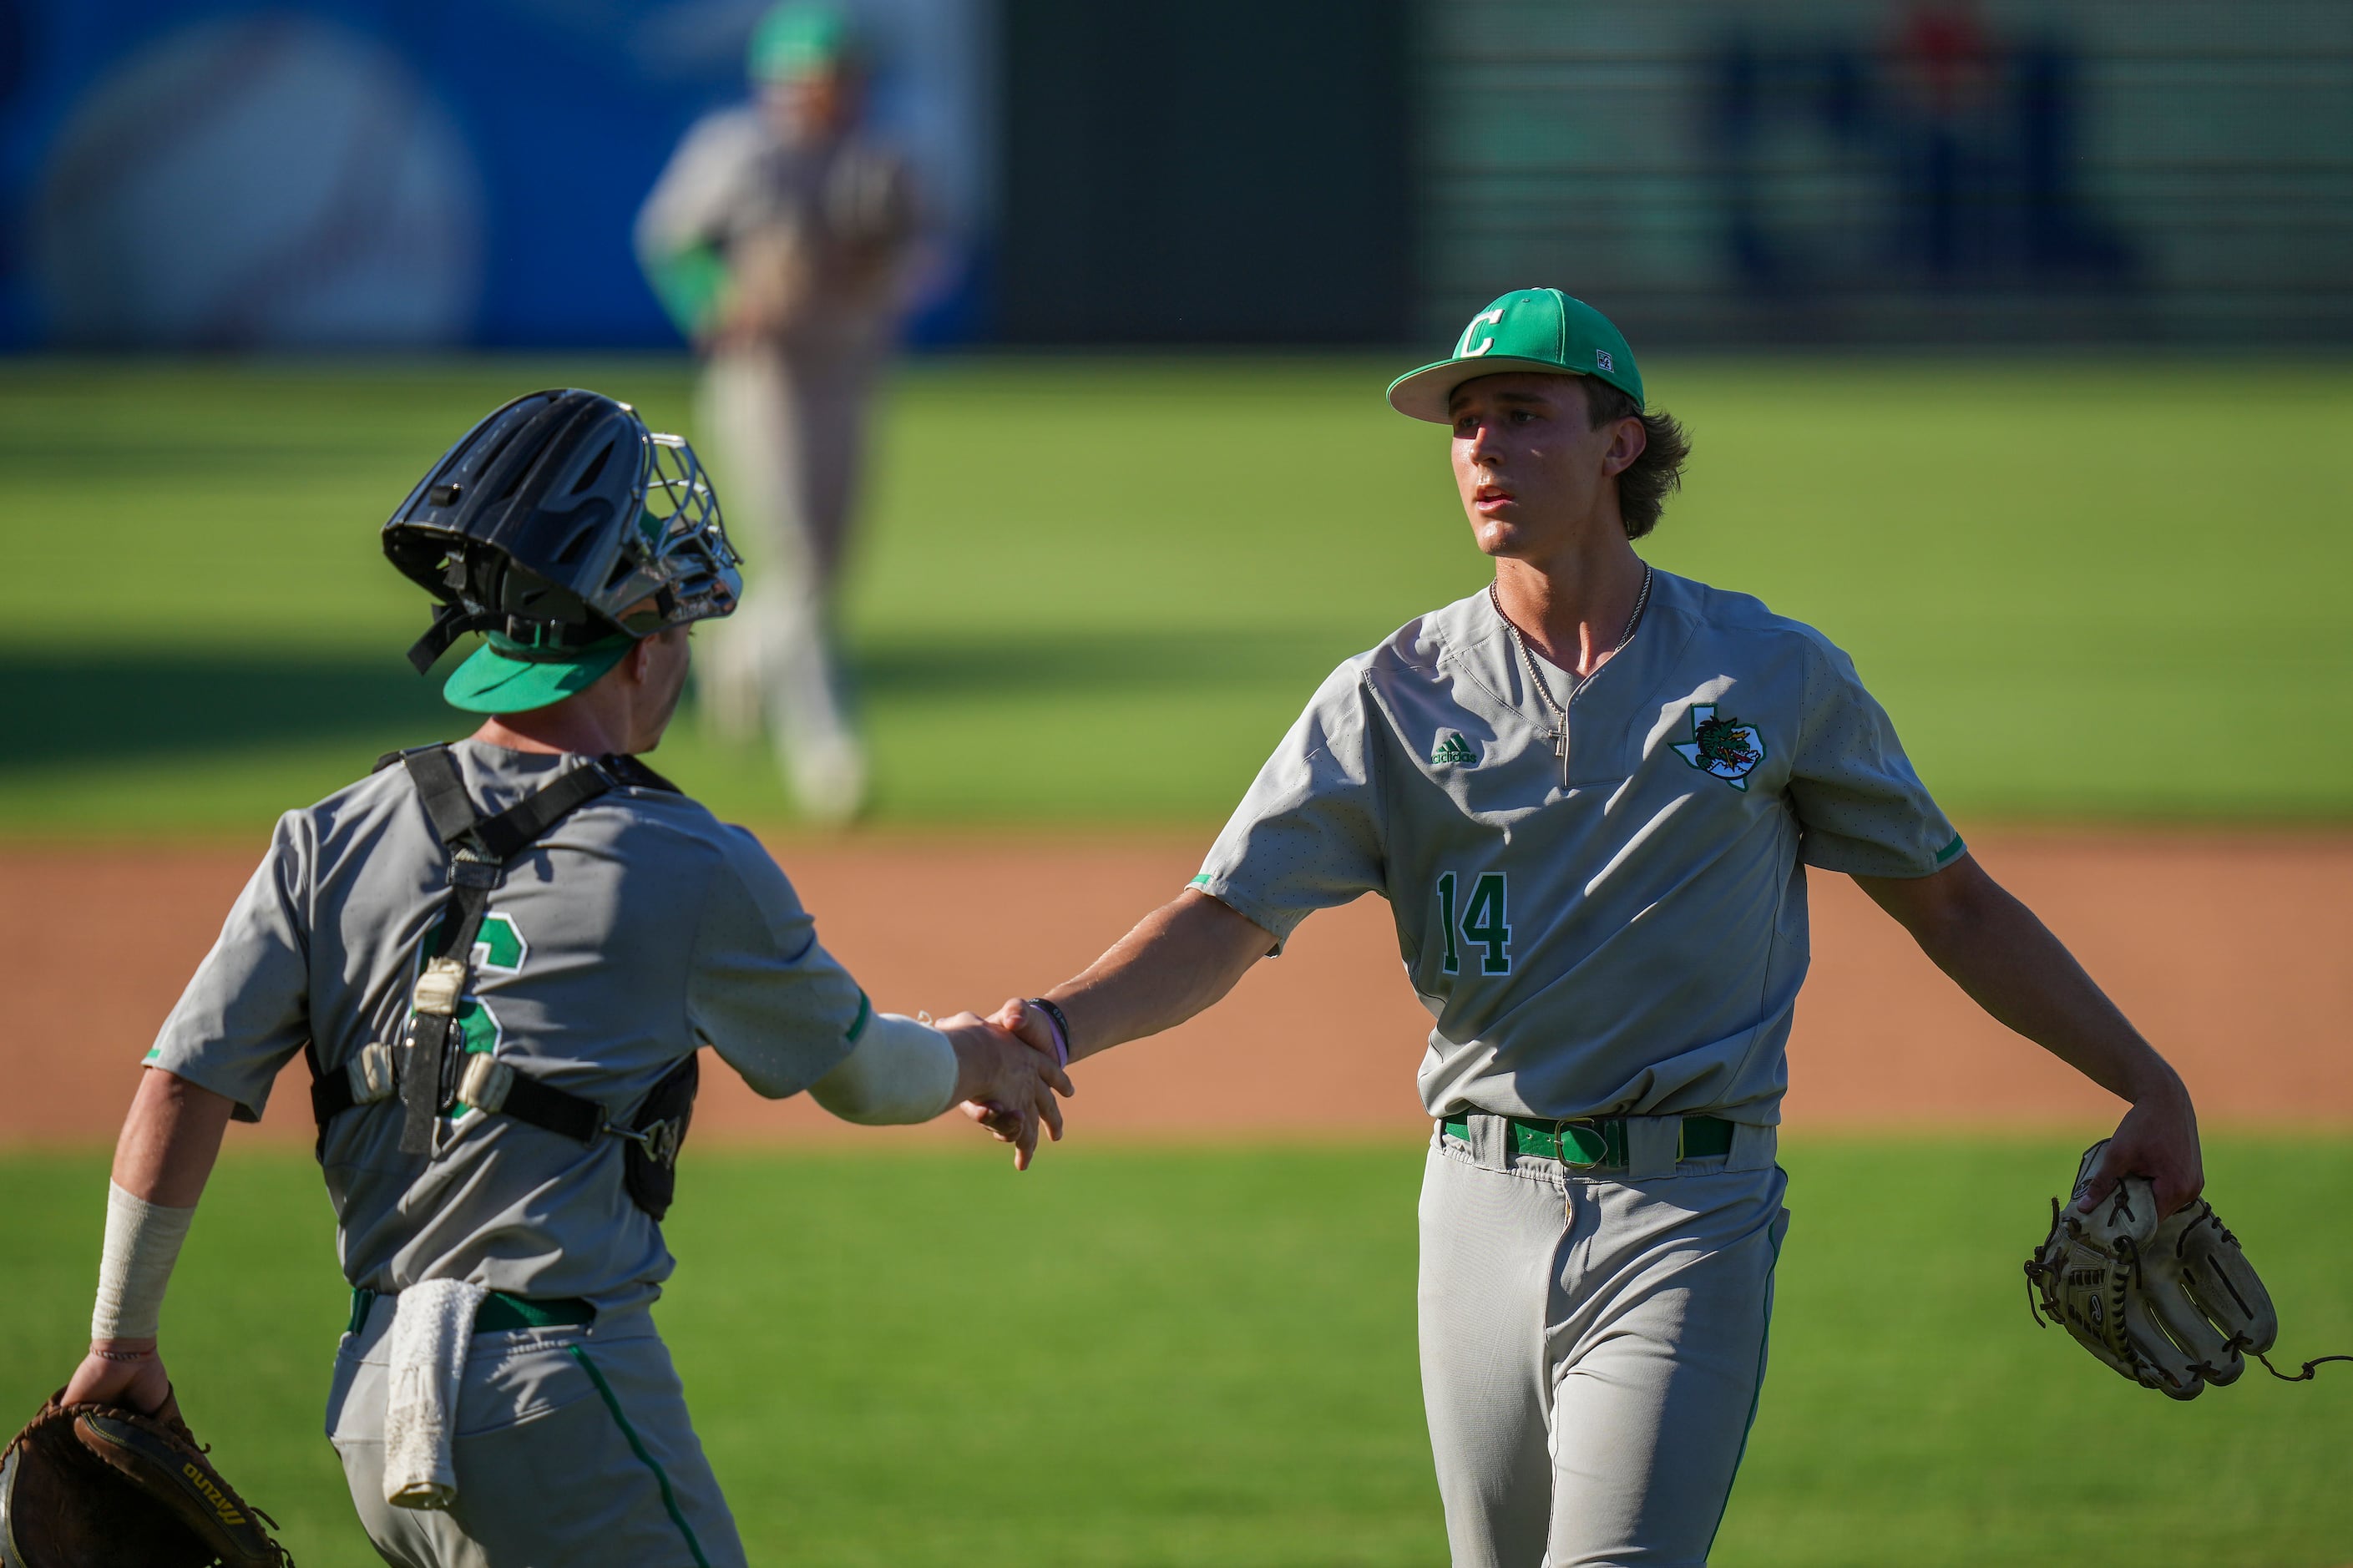 Southlake Carroll pitcher Griffin Herring shakes hands with catcher Clark Springs after the...